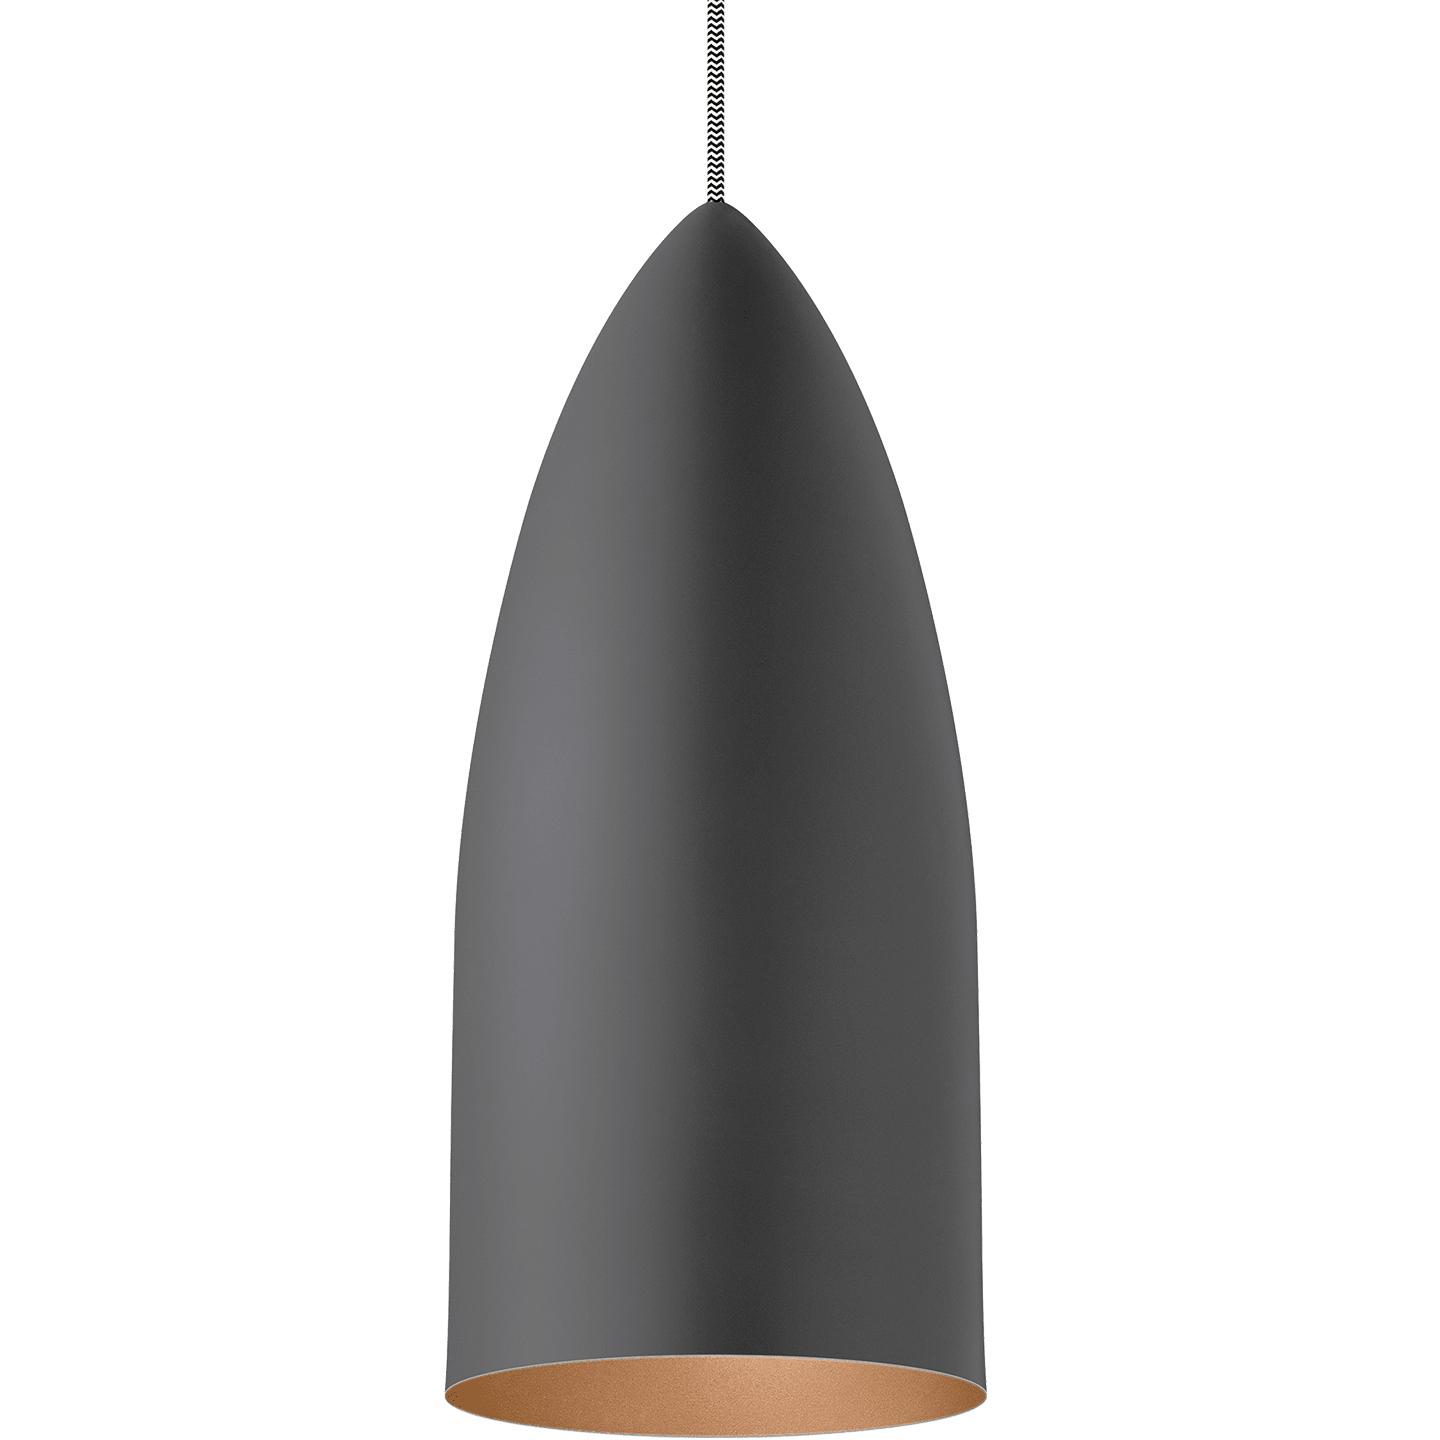 Rubberized Gray/Copper Lamp Not Included